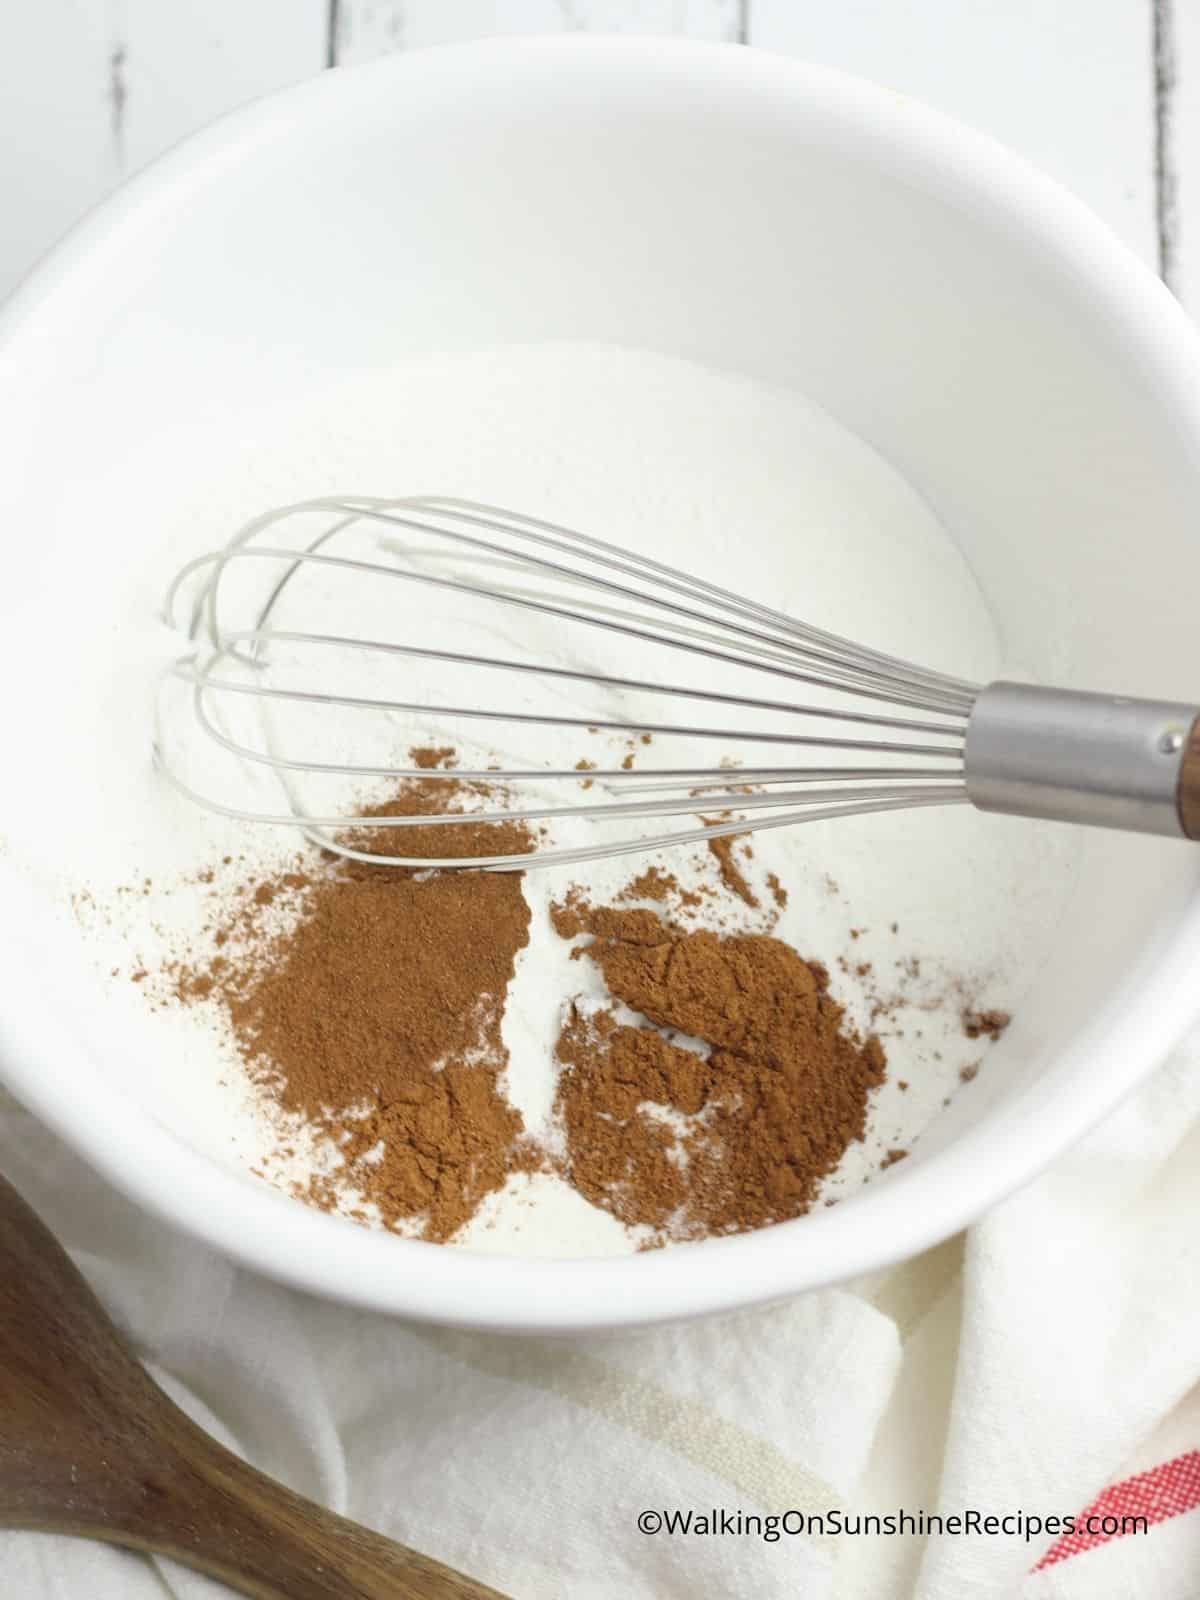 Combine dry ingredients together with whisk.